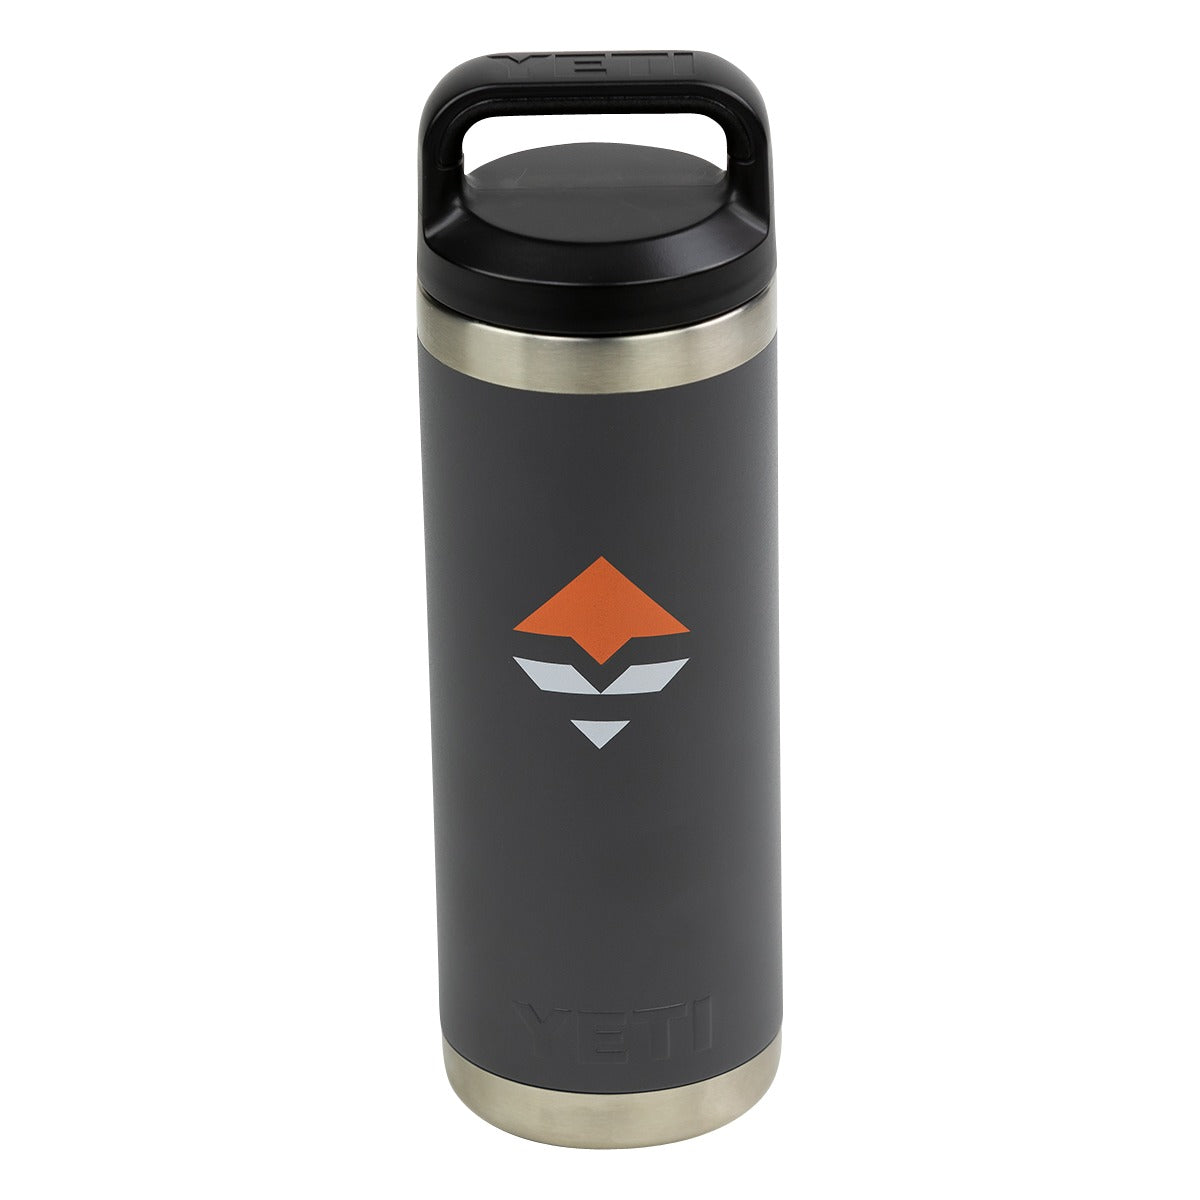 YETI Rambler 18 oz Bottle in YETI Rambler 18 oz Bottle by YETI | Camping - goHUNT Shop by GOHUNT | YETI - GOHUNT Shop